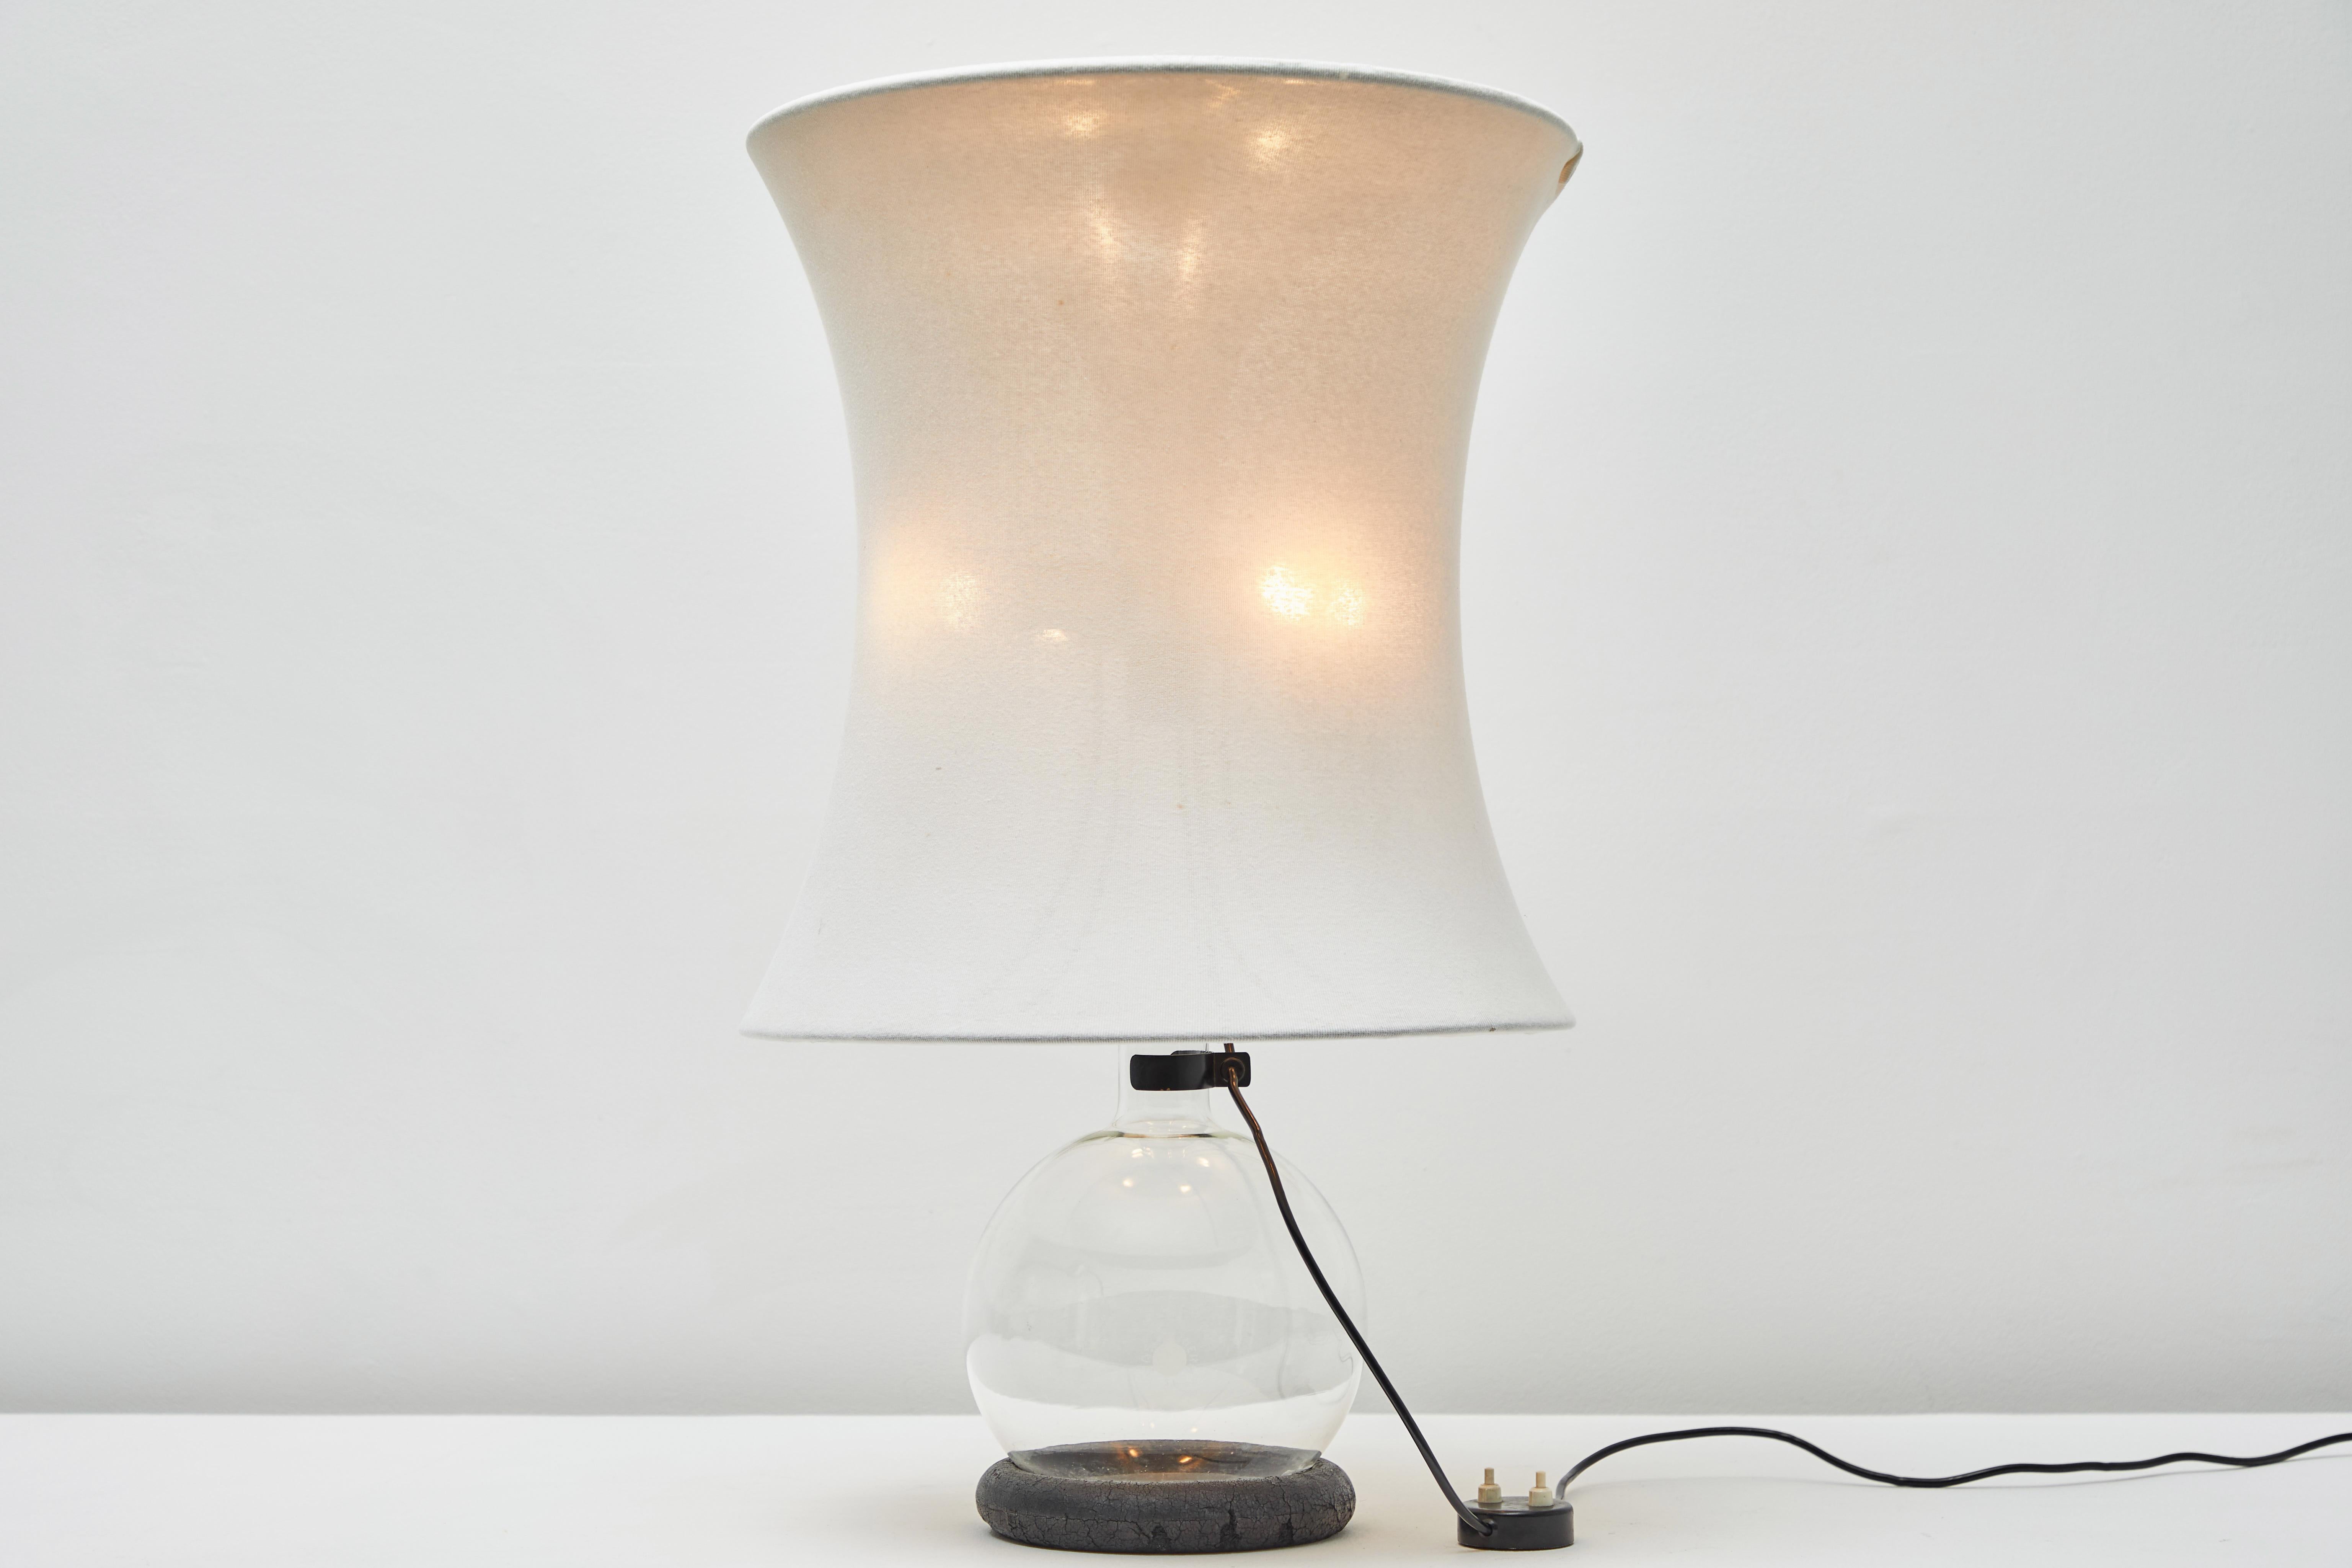 Rare lotus table lamp by Gianfranco Frattini for Meroni. Designed and manufactured in Italy, 1966. Wooden ring stand, glass base, metal armature covered in fabric. Shade is secured by an aluminum deflector at top of shade and secured to base by a